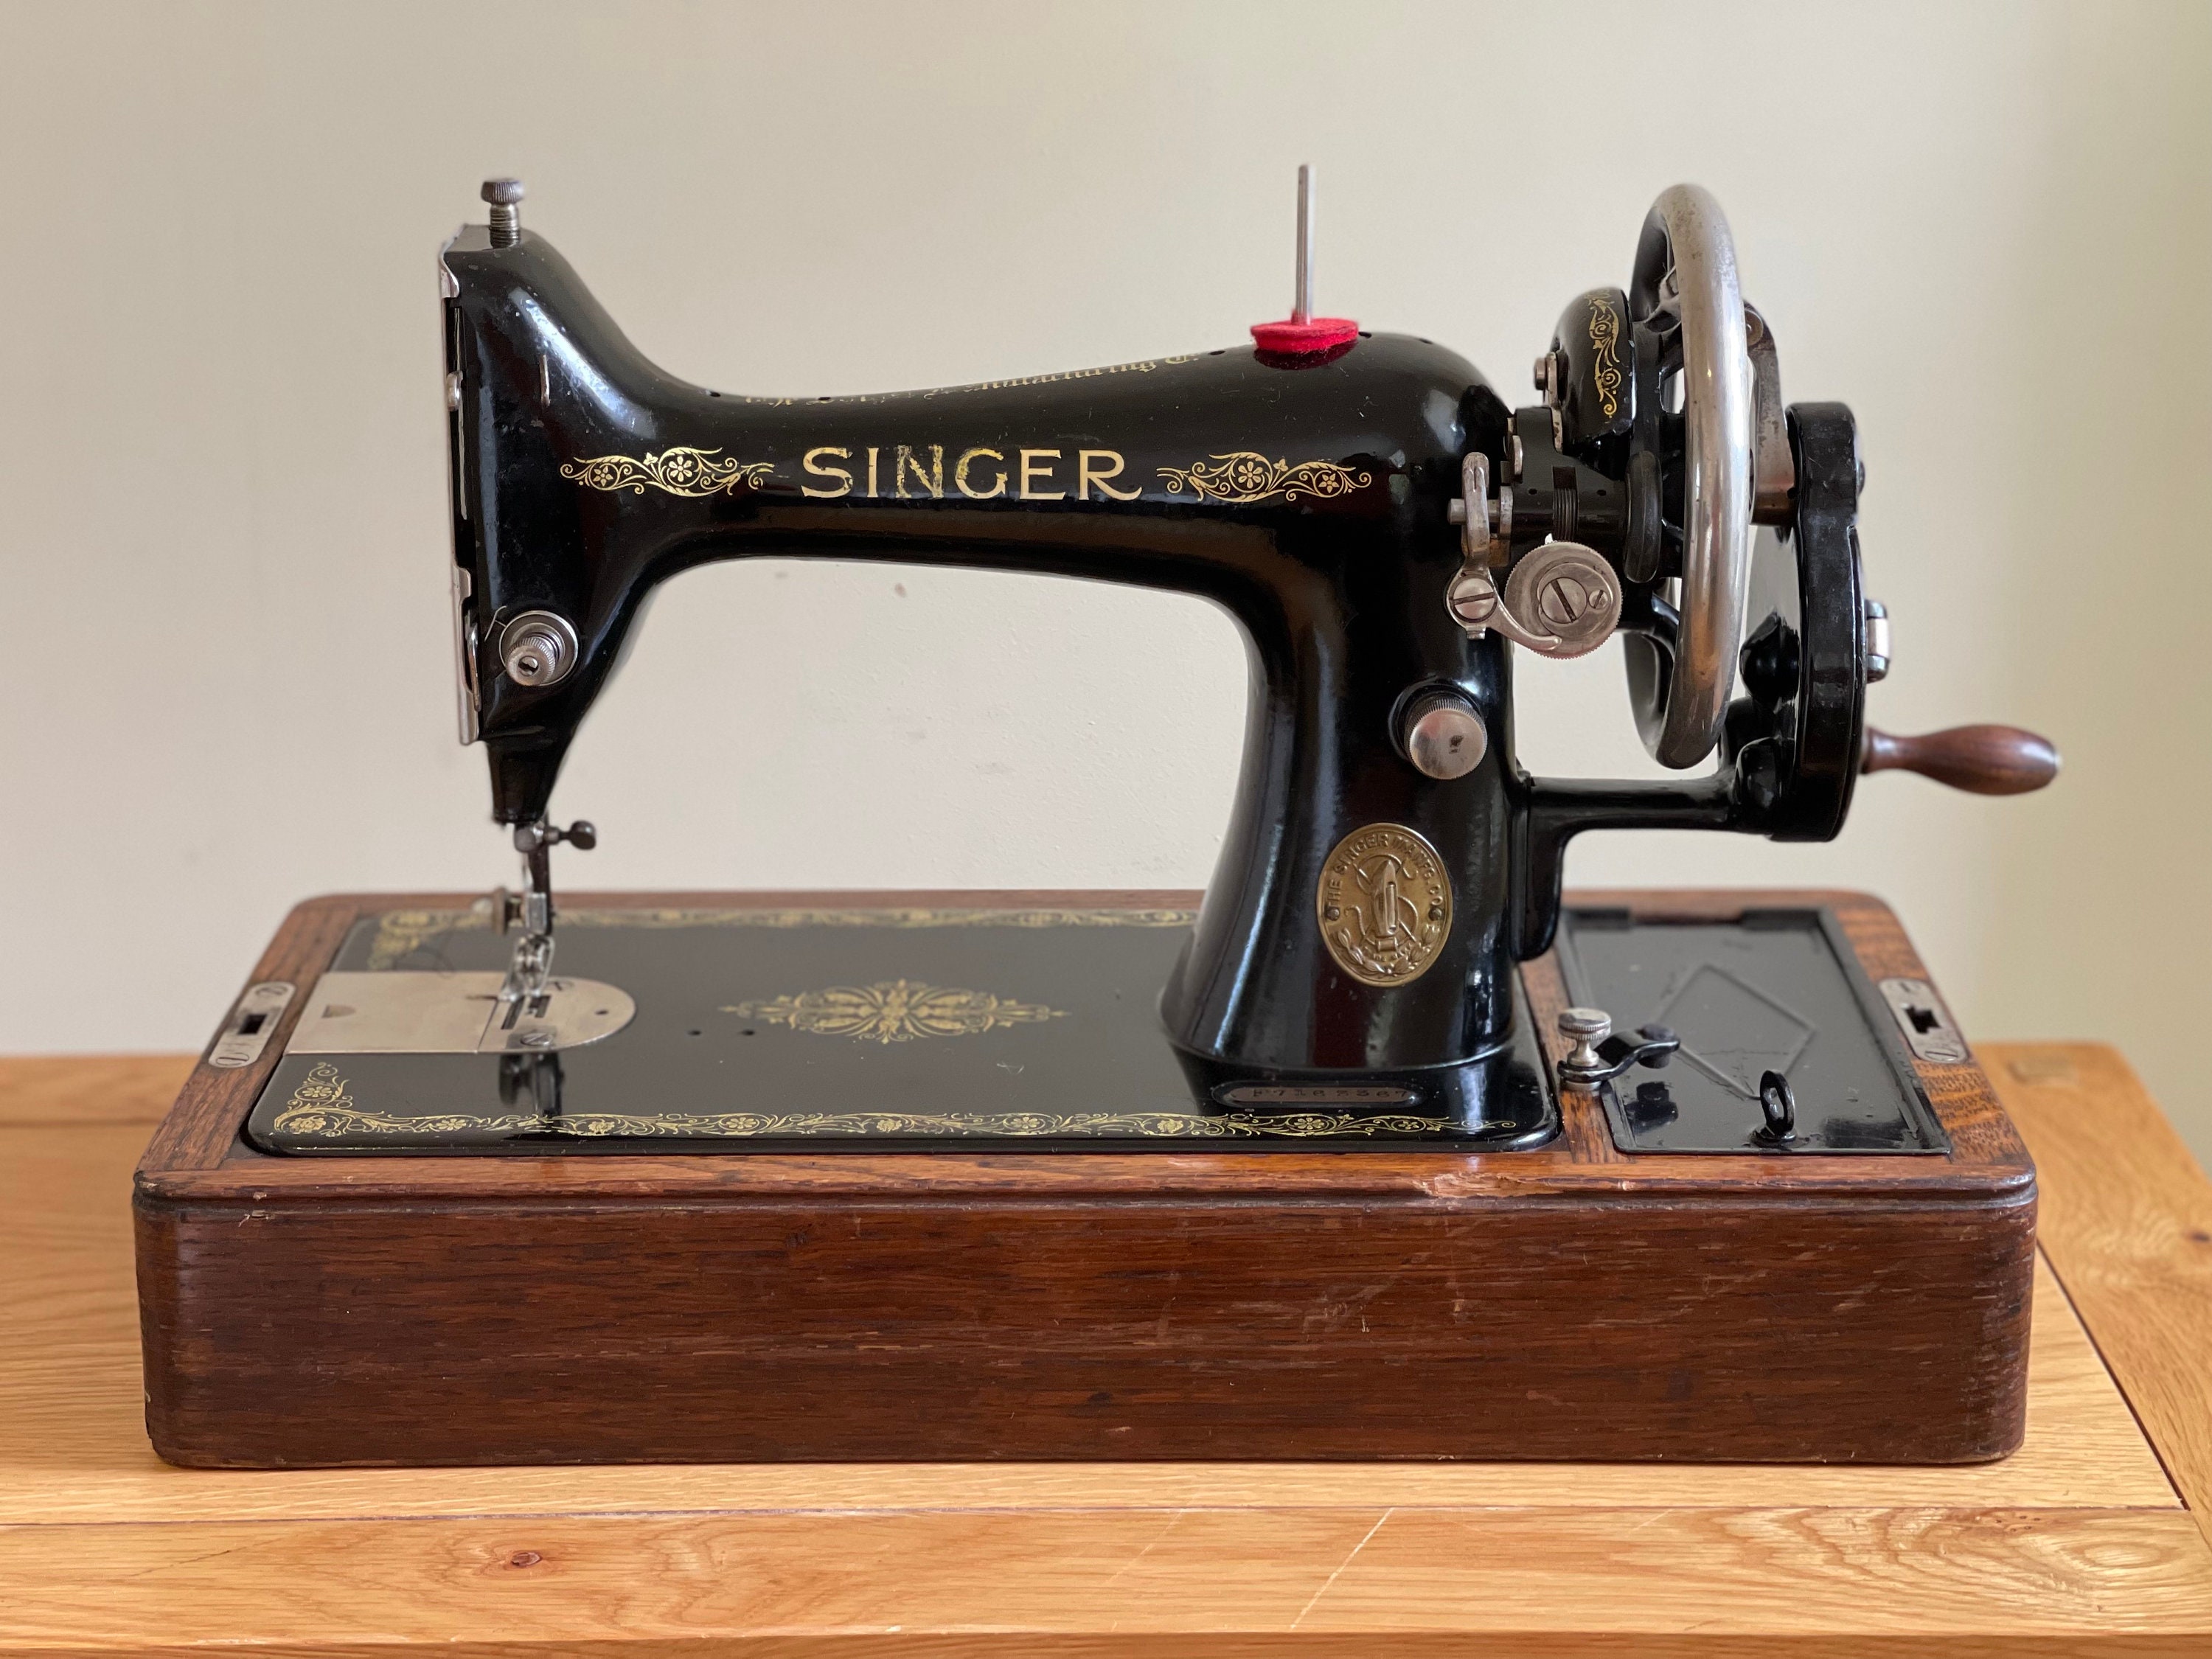 SINGER Sewing Machine Bentwood Wooden Carrying Case for 15 15-91 201 201-2  66 316 127 27 Restored by 3FTERS 